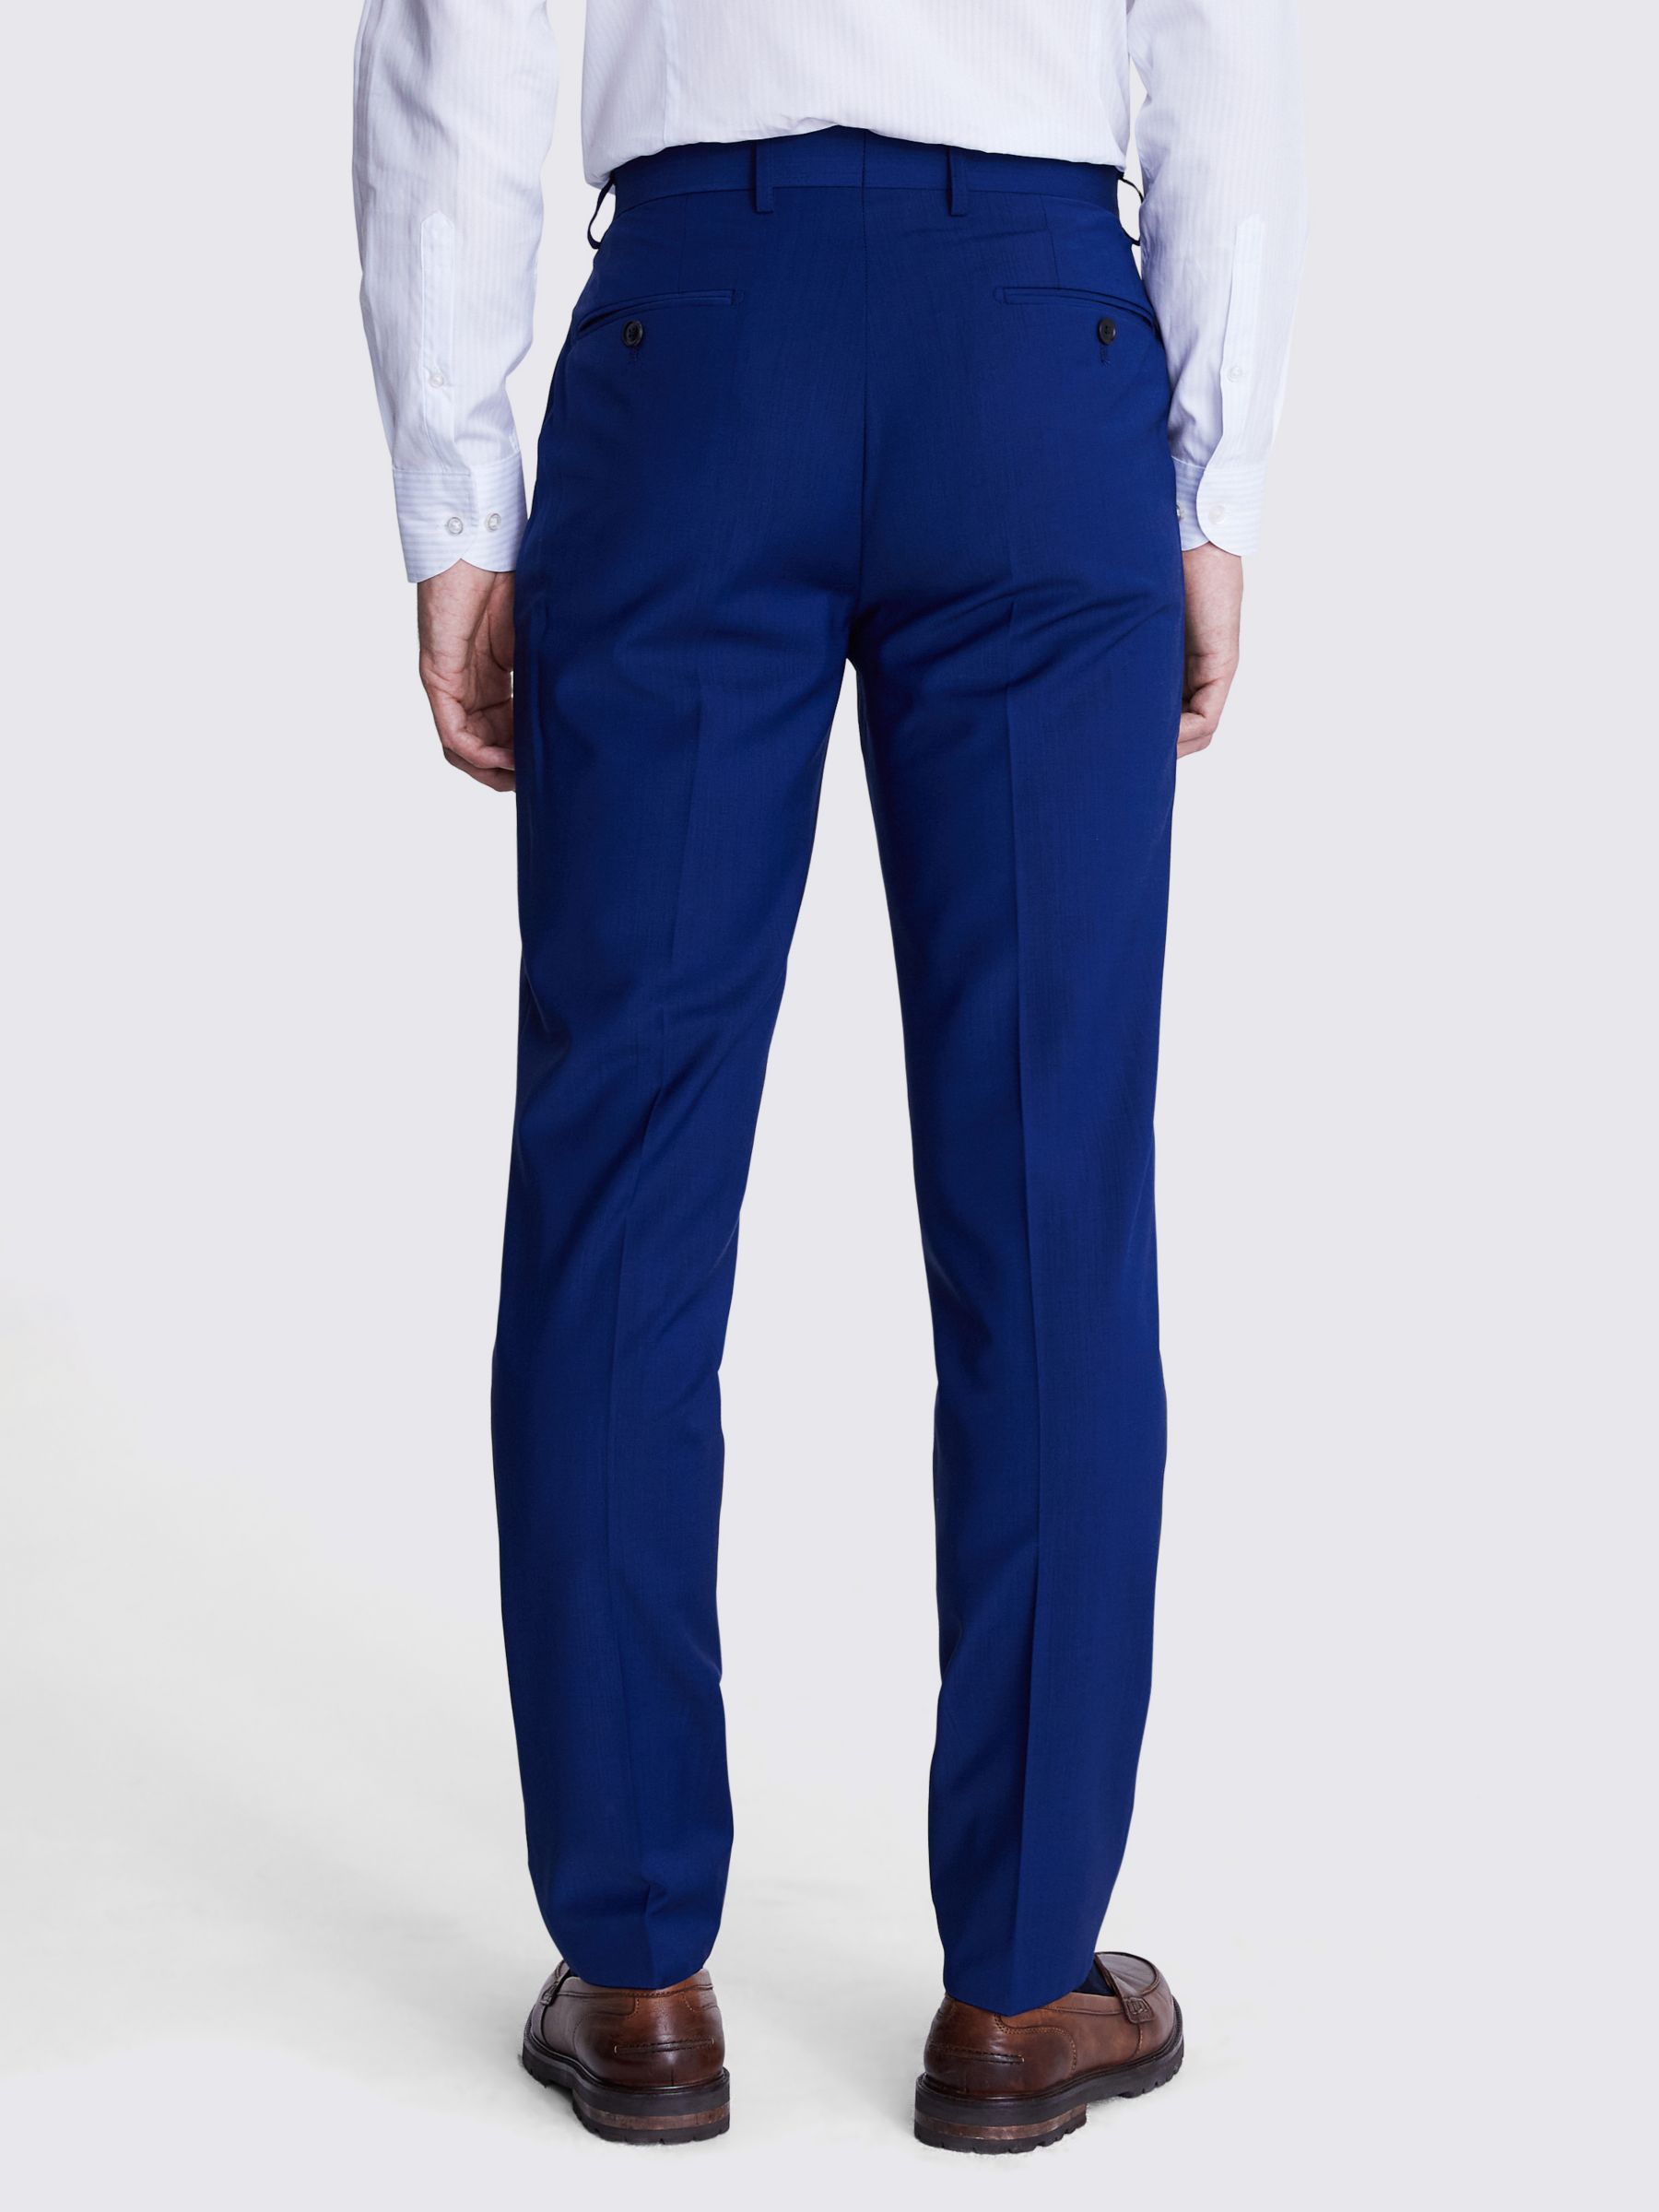 Moss Tailored Fit Wool Blend Suit Trousers, Royal Blue, 42R